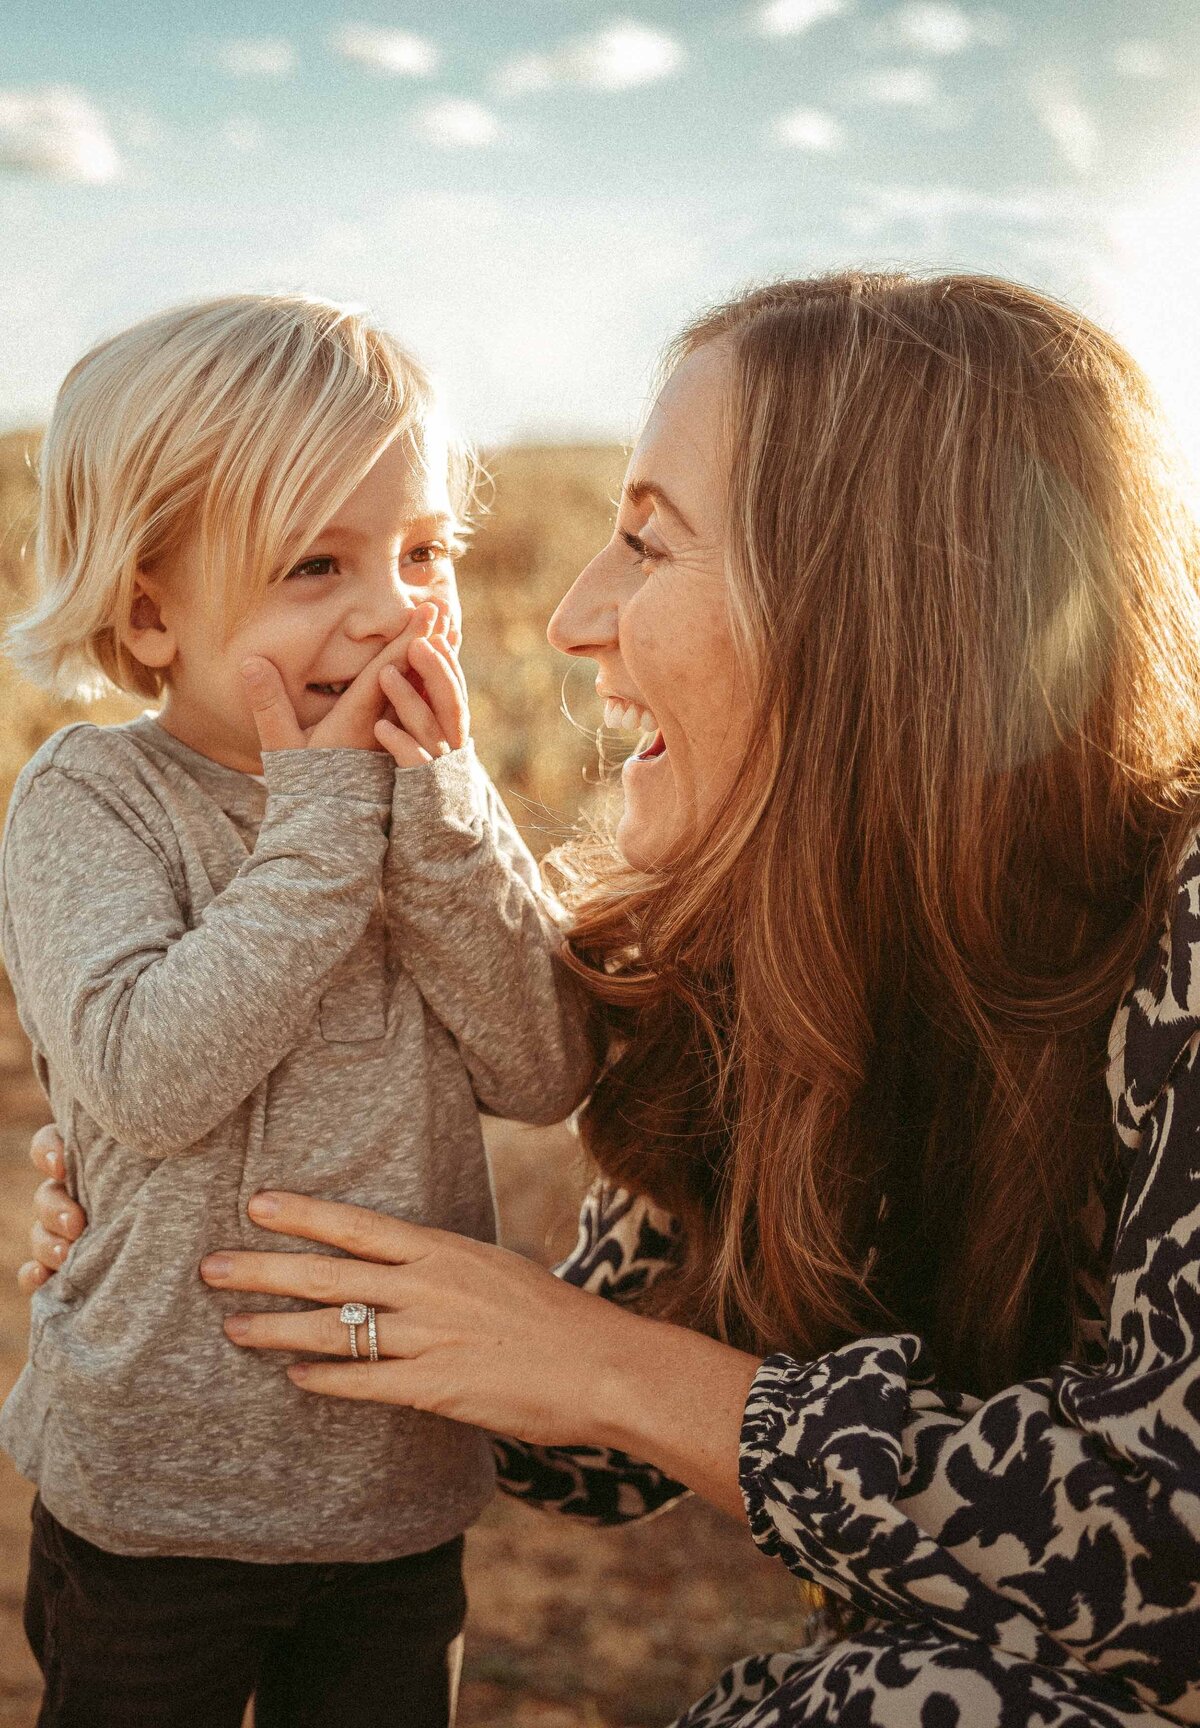 Young boy is laughing and covering his mouth with both of his hands while his mother laughs and looks at him